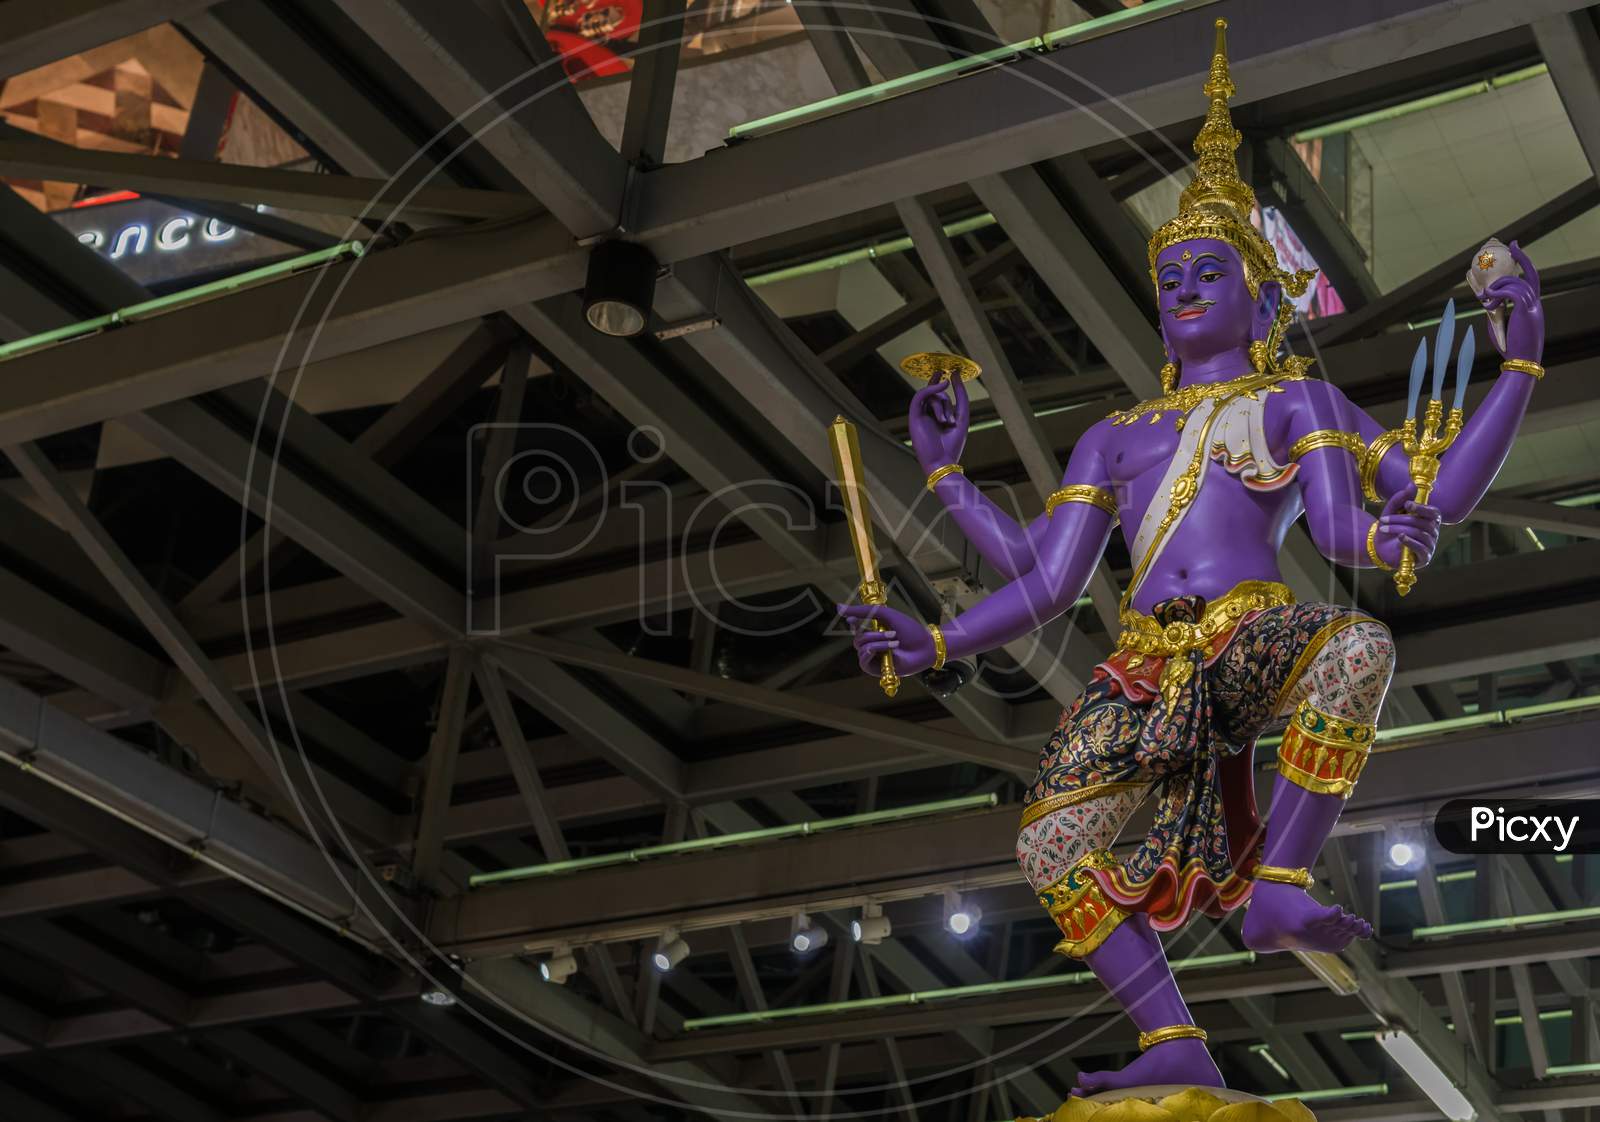 Bangkok,Thailand - October 30,2018:Suvarnabhumi Airport This Is A Statue To Show The Culture Of Buddhism.It Is At The Beginning Of The Duty Free Area.